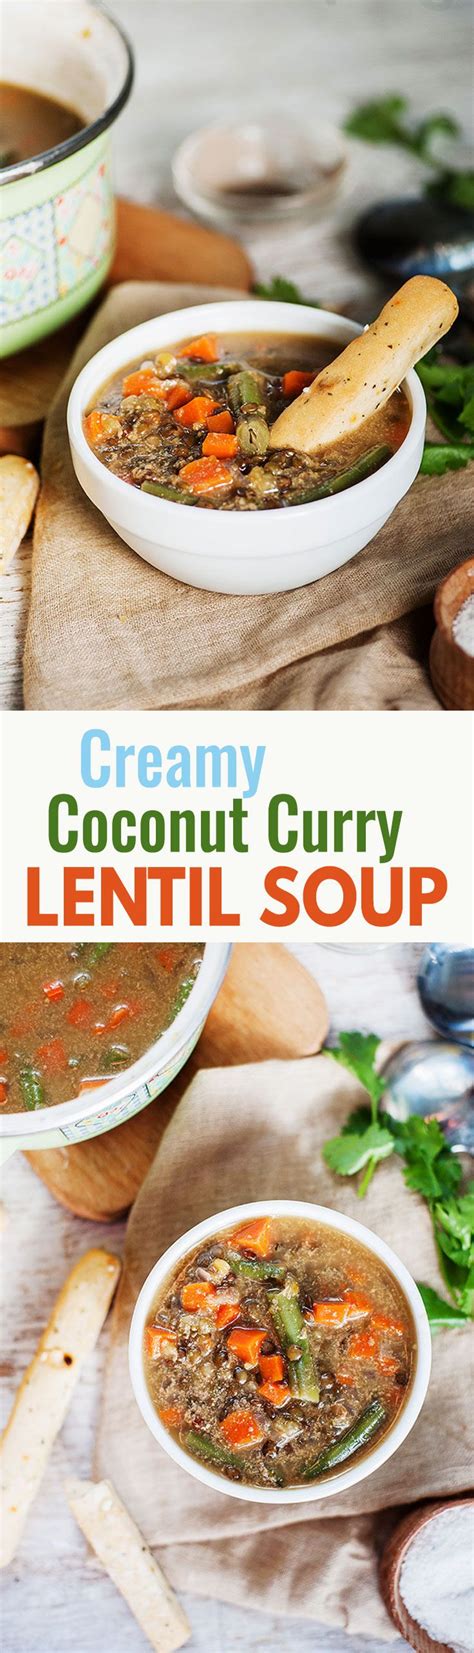 Bring to a boil and cook for about 10 mins. Creamy Coconut Curry Lentil Soup | Recipe | Curried lentil ...